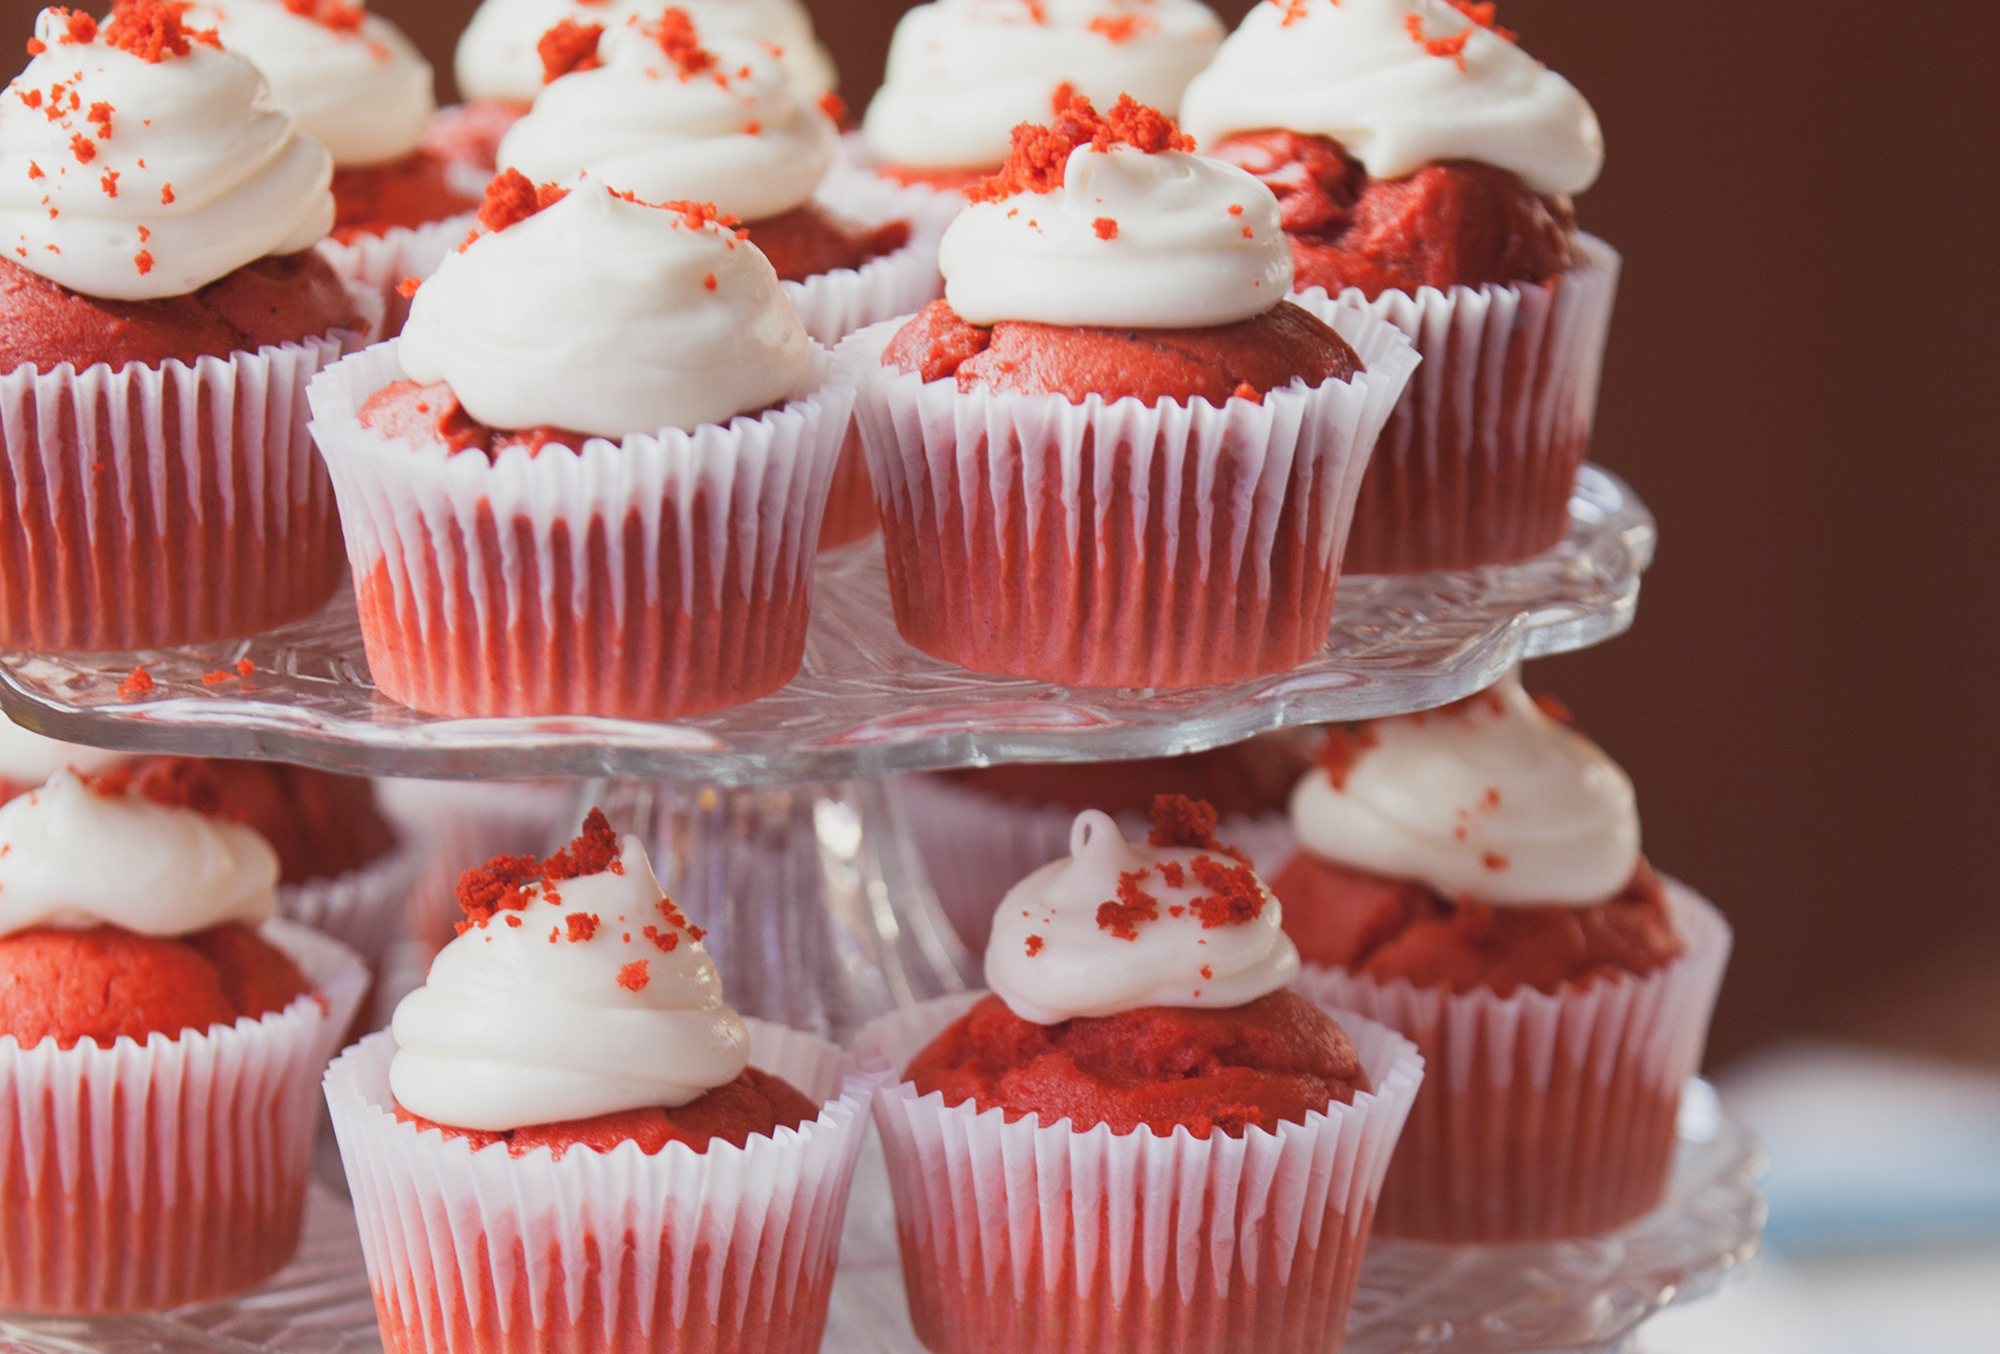 red velvet cupcakes a top a cupcake stand